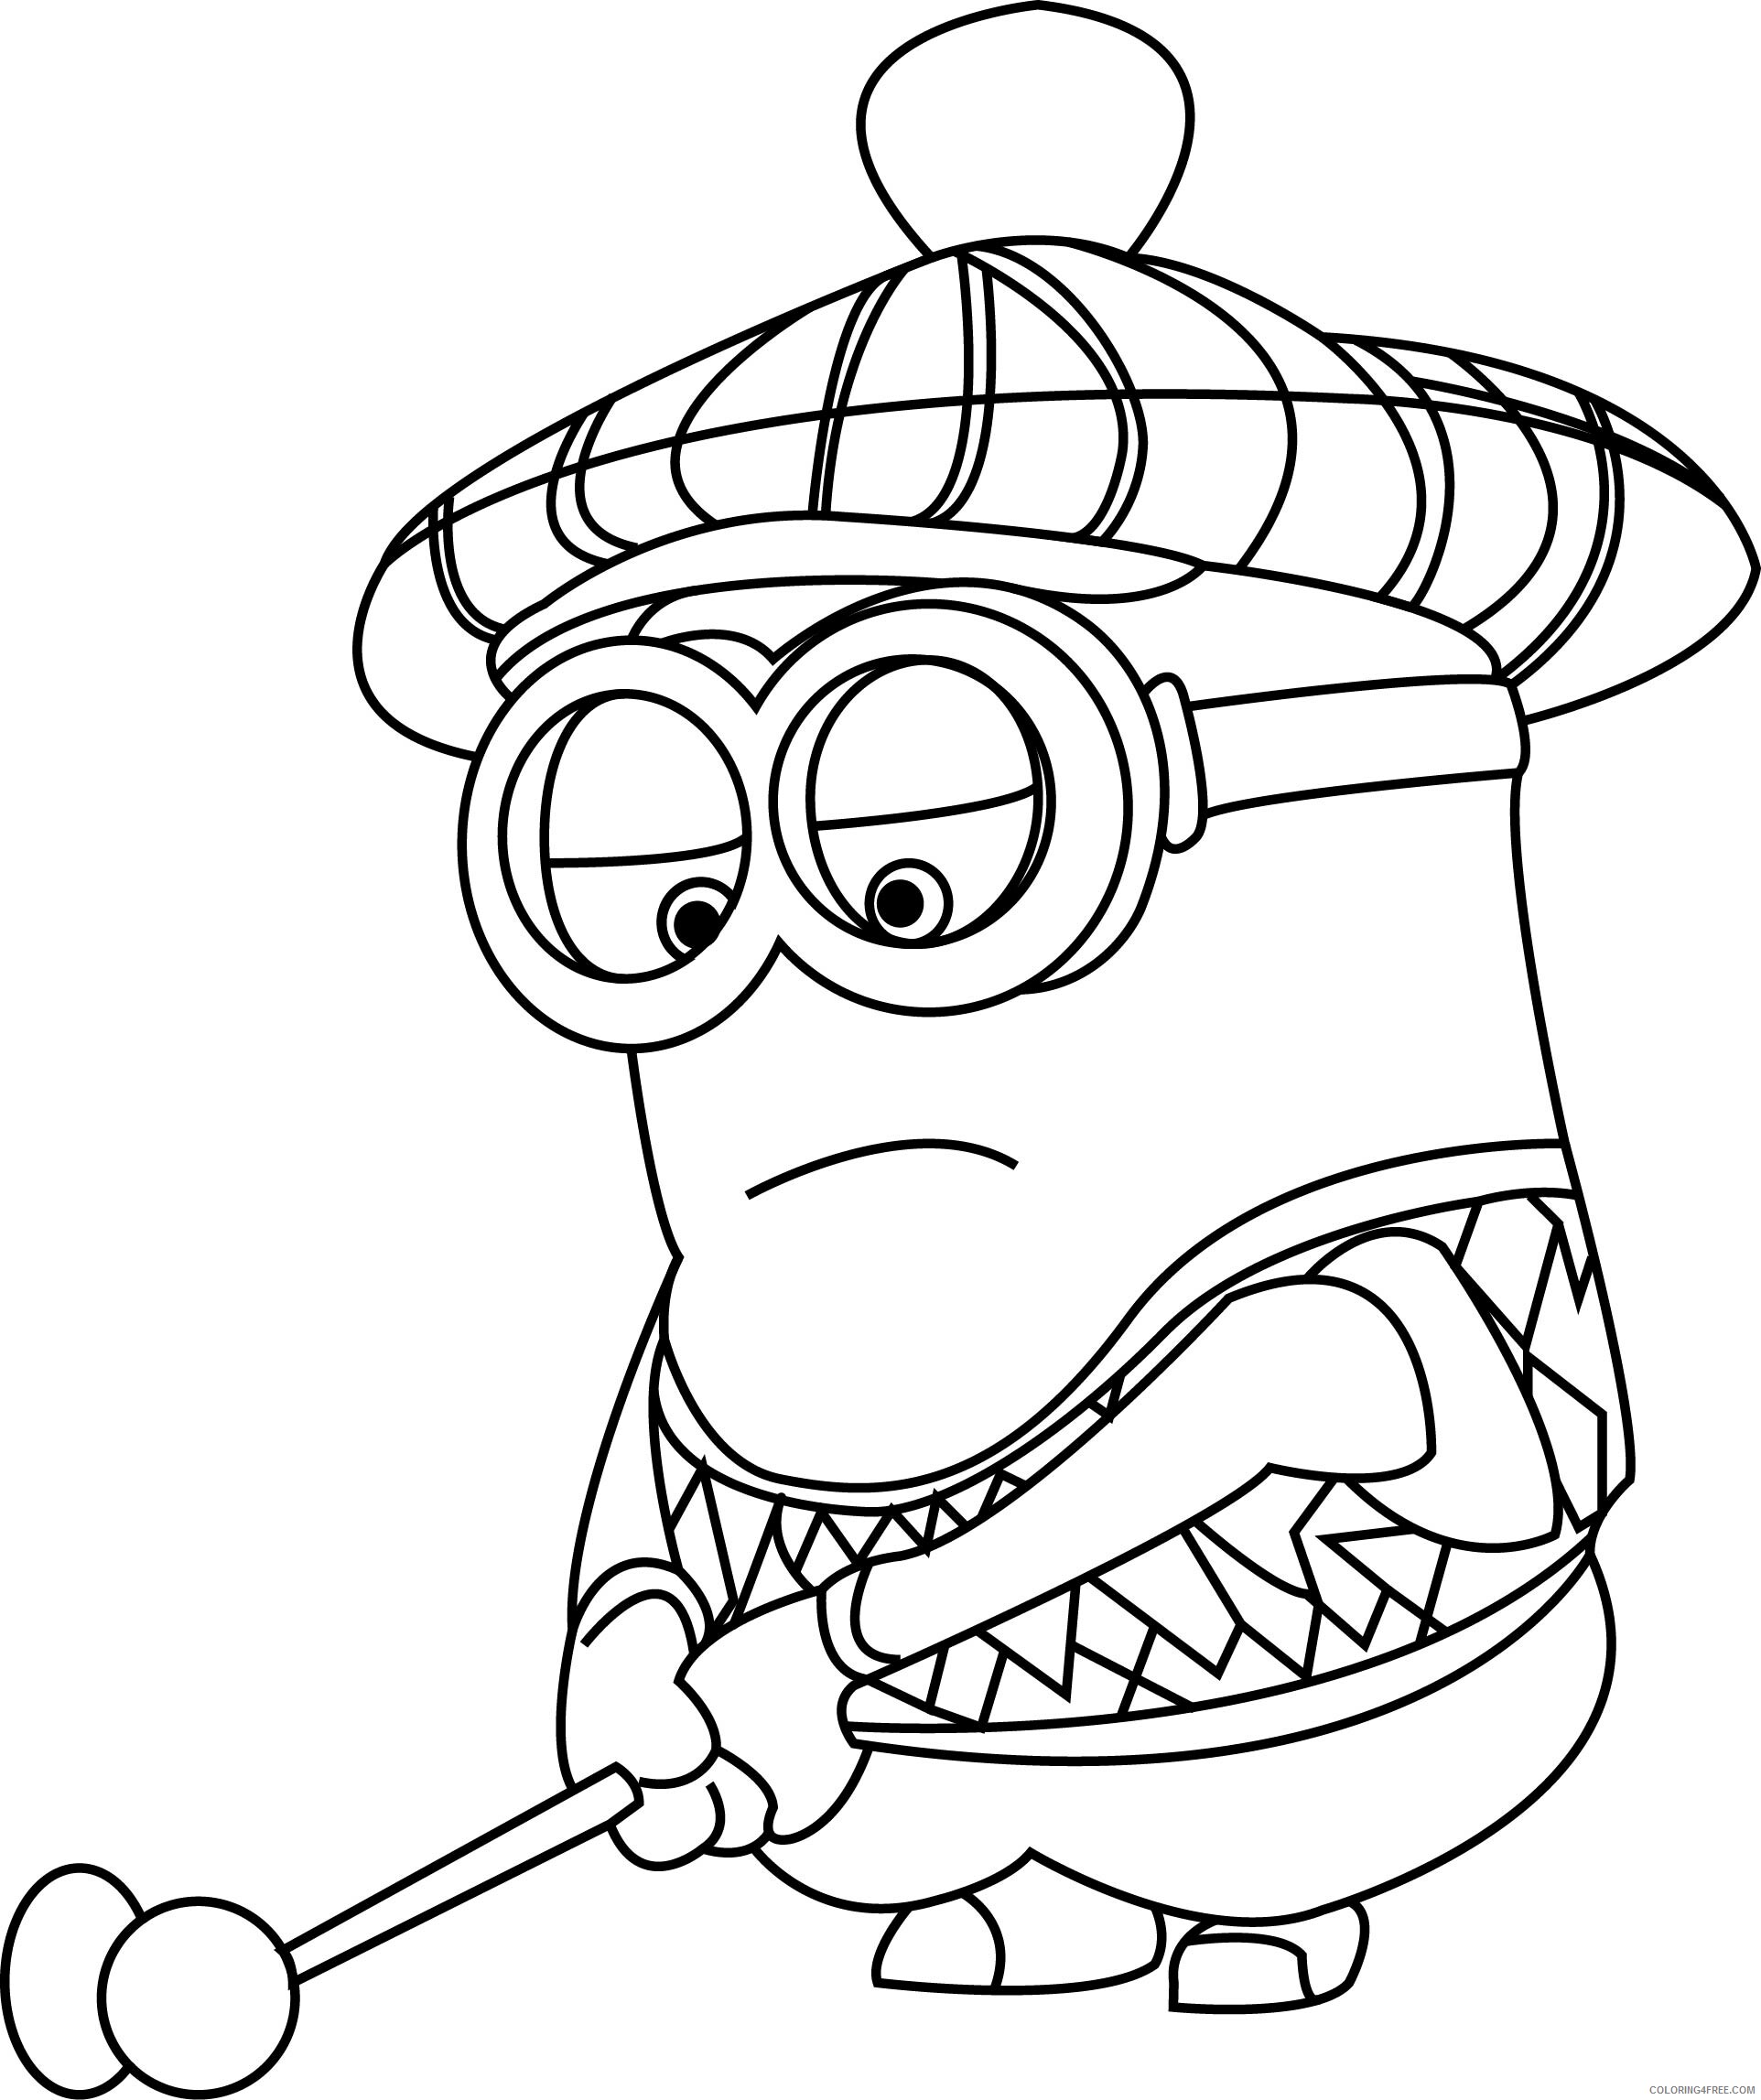 Minions Coloring Pages TV Film Minion Golf Printable 2020 05207 Coloring4free